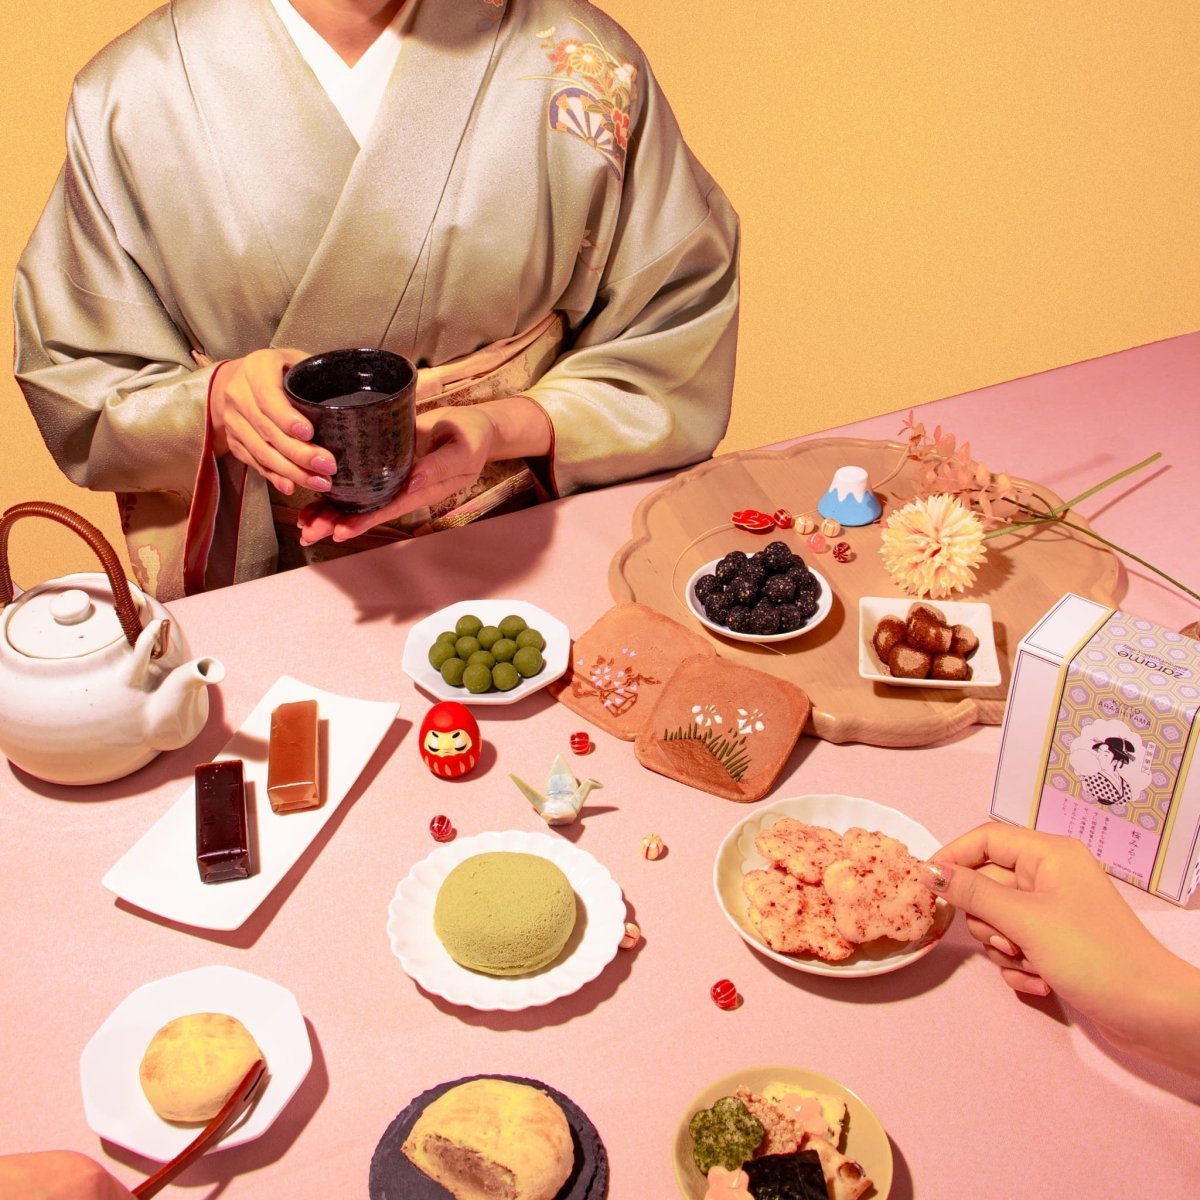 Woman in a traditional Japanese kimono enjoying a tea ceremony with various Japanese sweets and snacks arranged on a table, including mochi, rice crackers, and sweets, against a pink and yellow background.